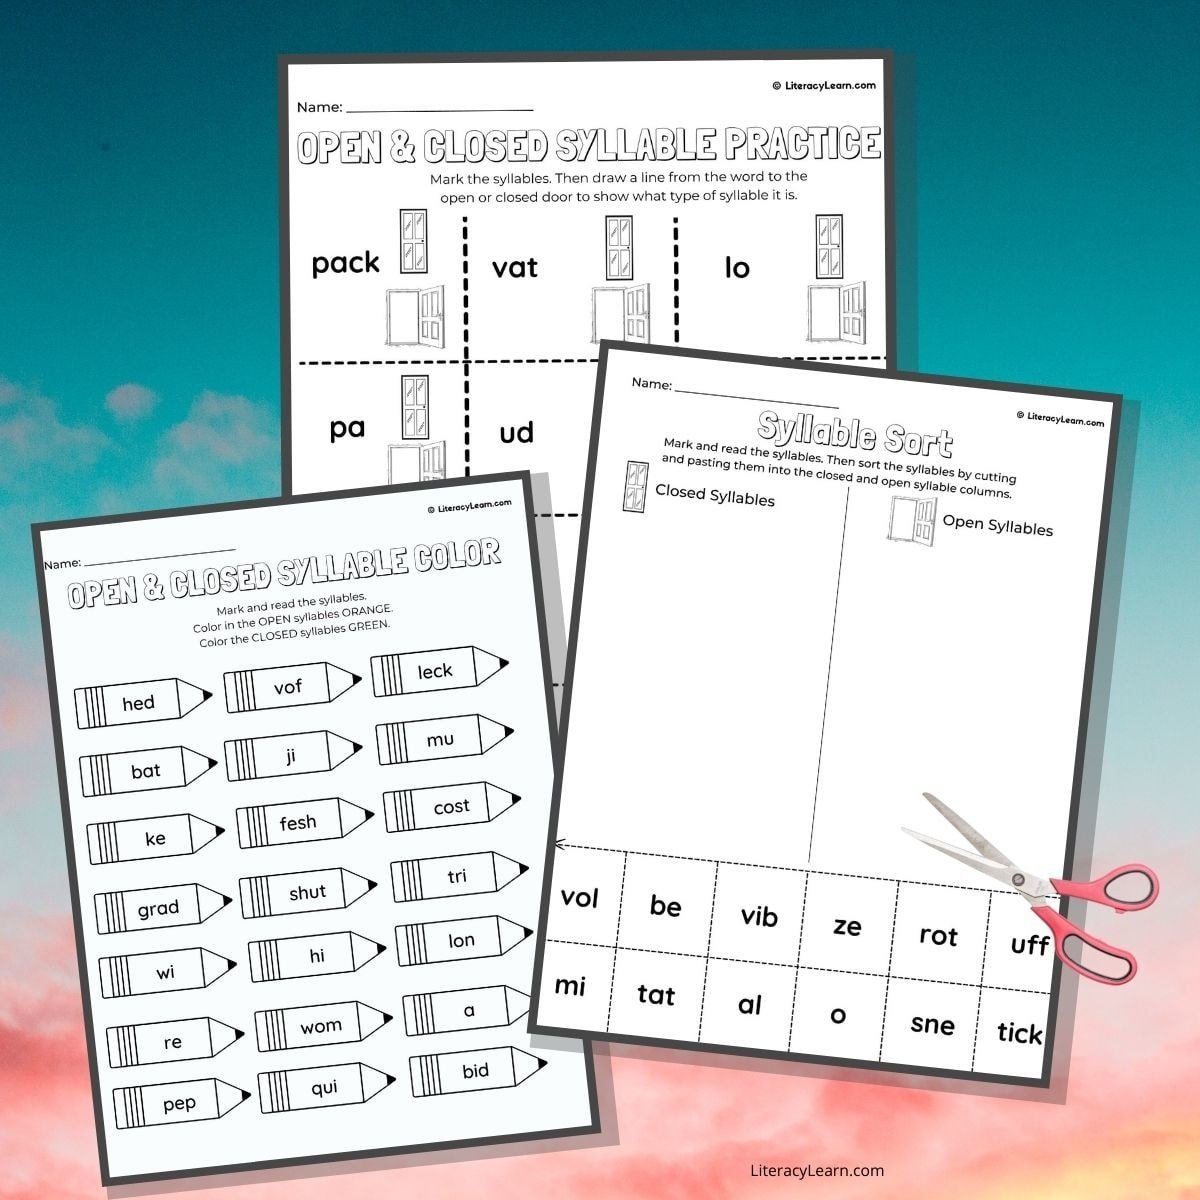 Images of three open and closed syllable worksheets with a colorful background.